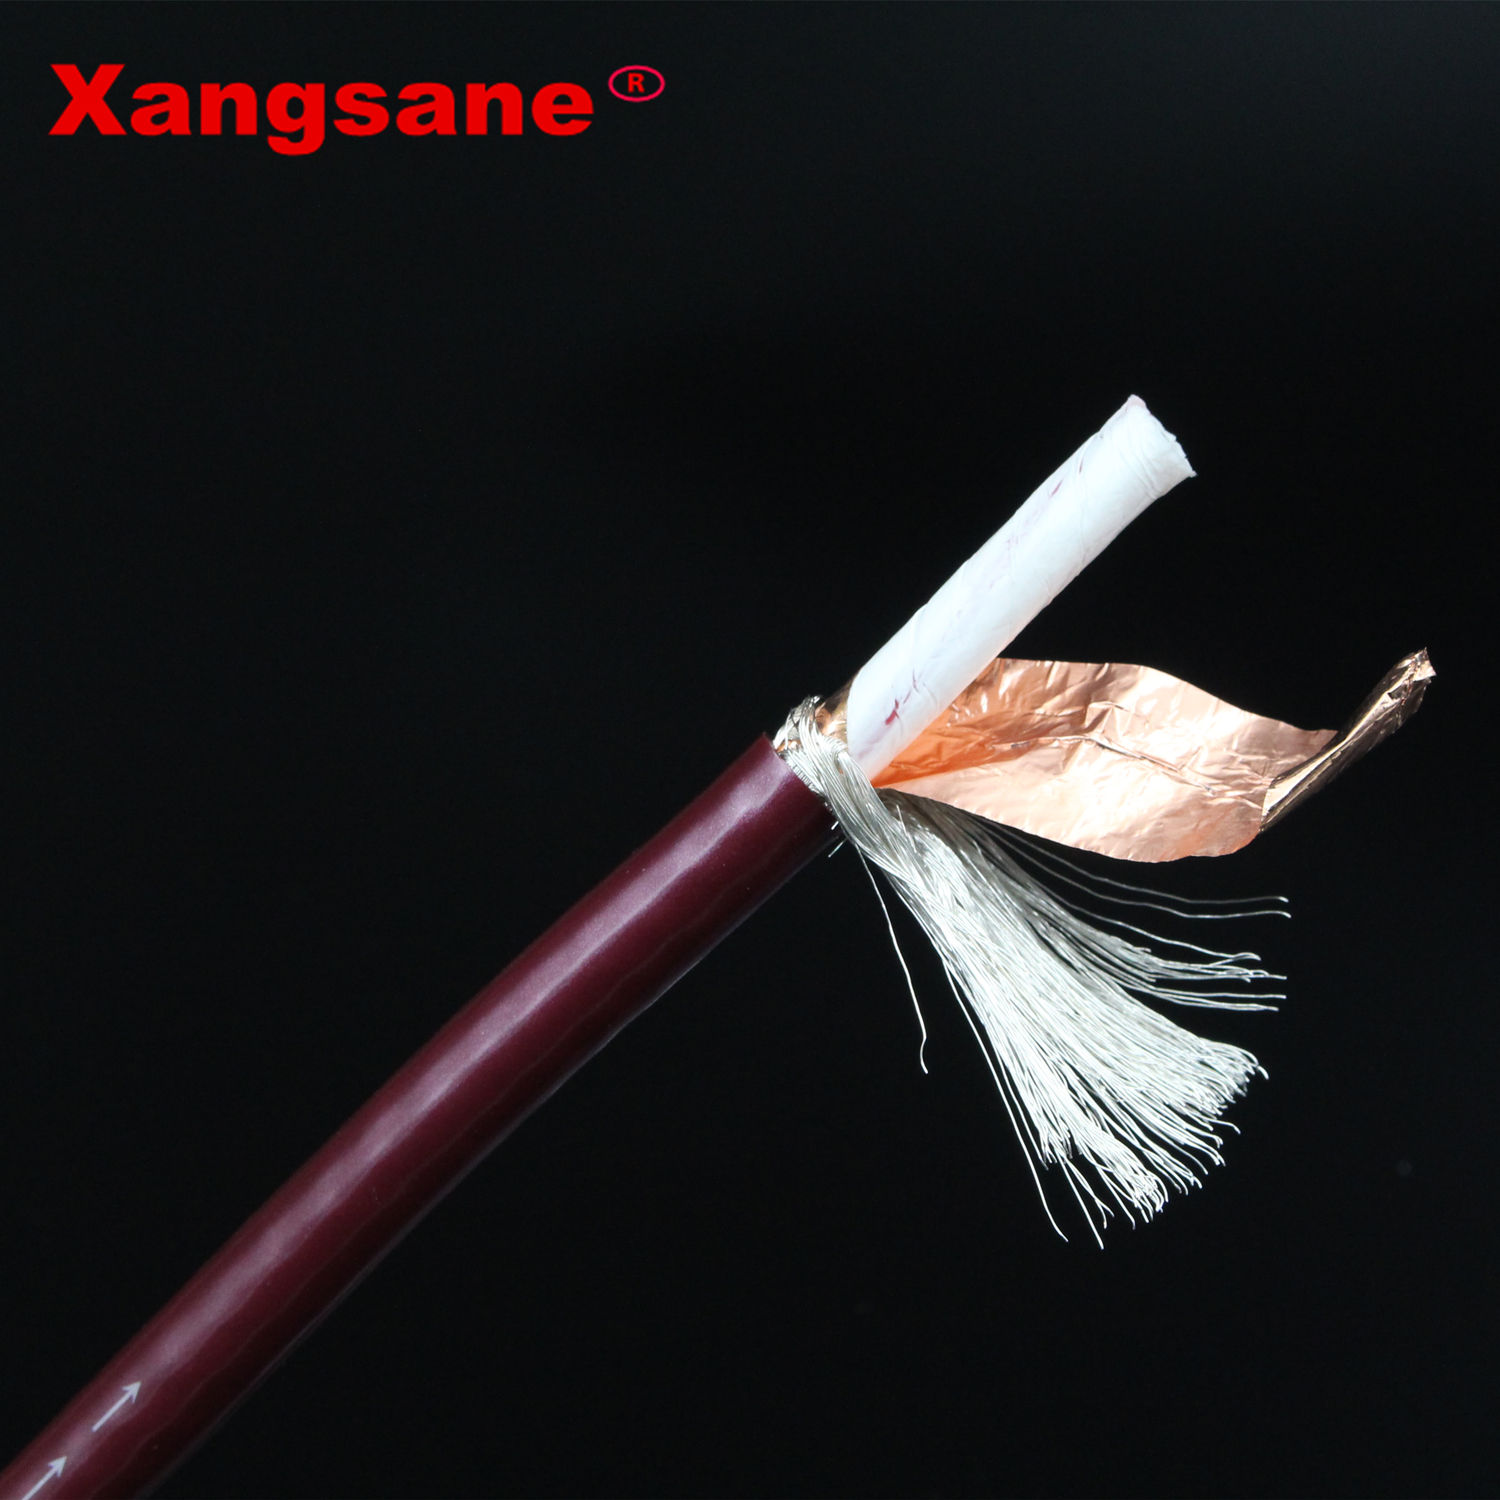 Xangsane-square-core-4N-pure-silver-conductor-high-density-shielded-HIFI-audio-signal-cable-RCA-connecting-cable-XLR-bulk-cable-2251832818970285